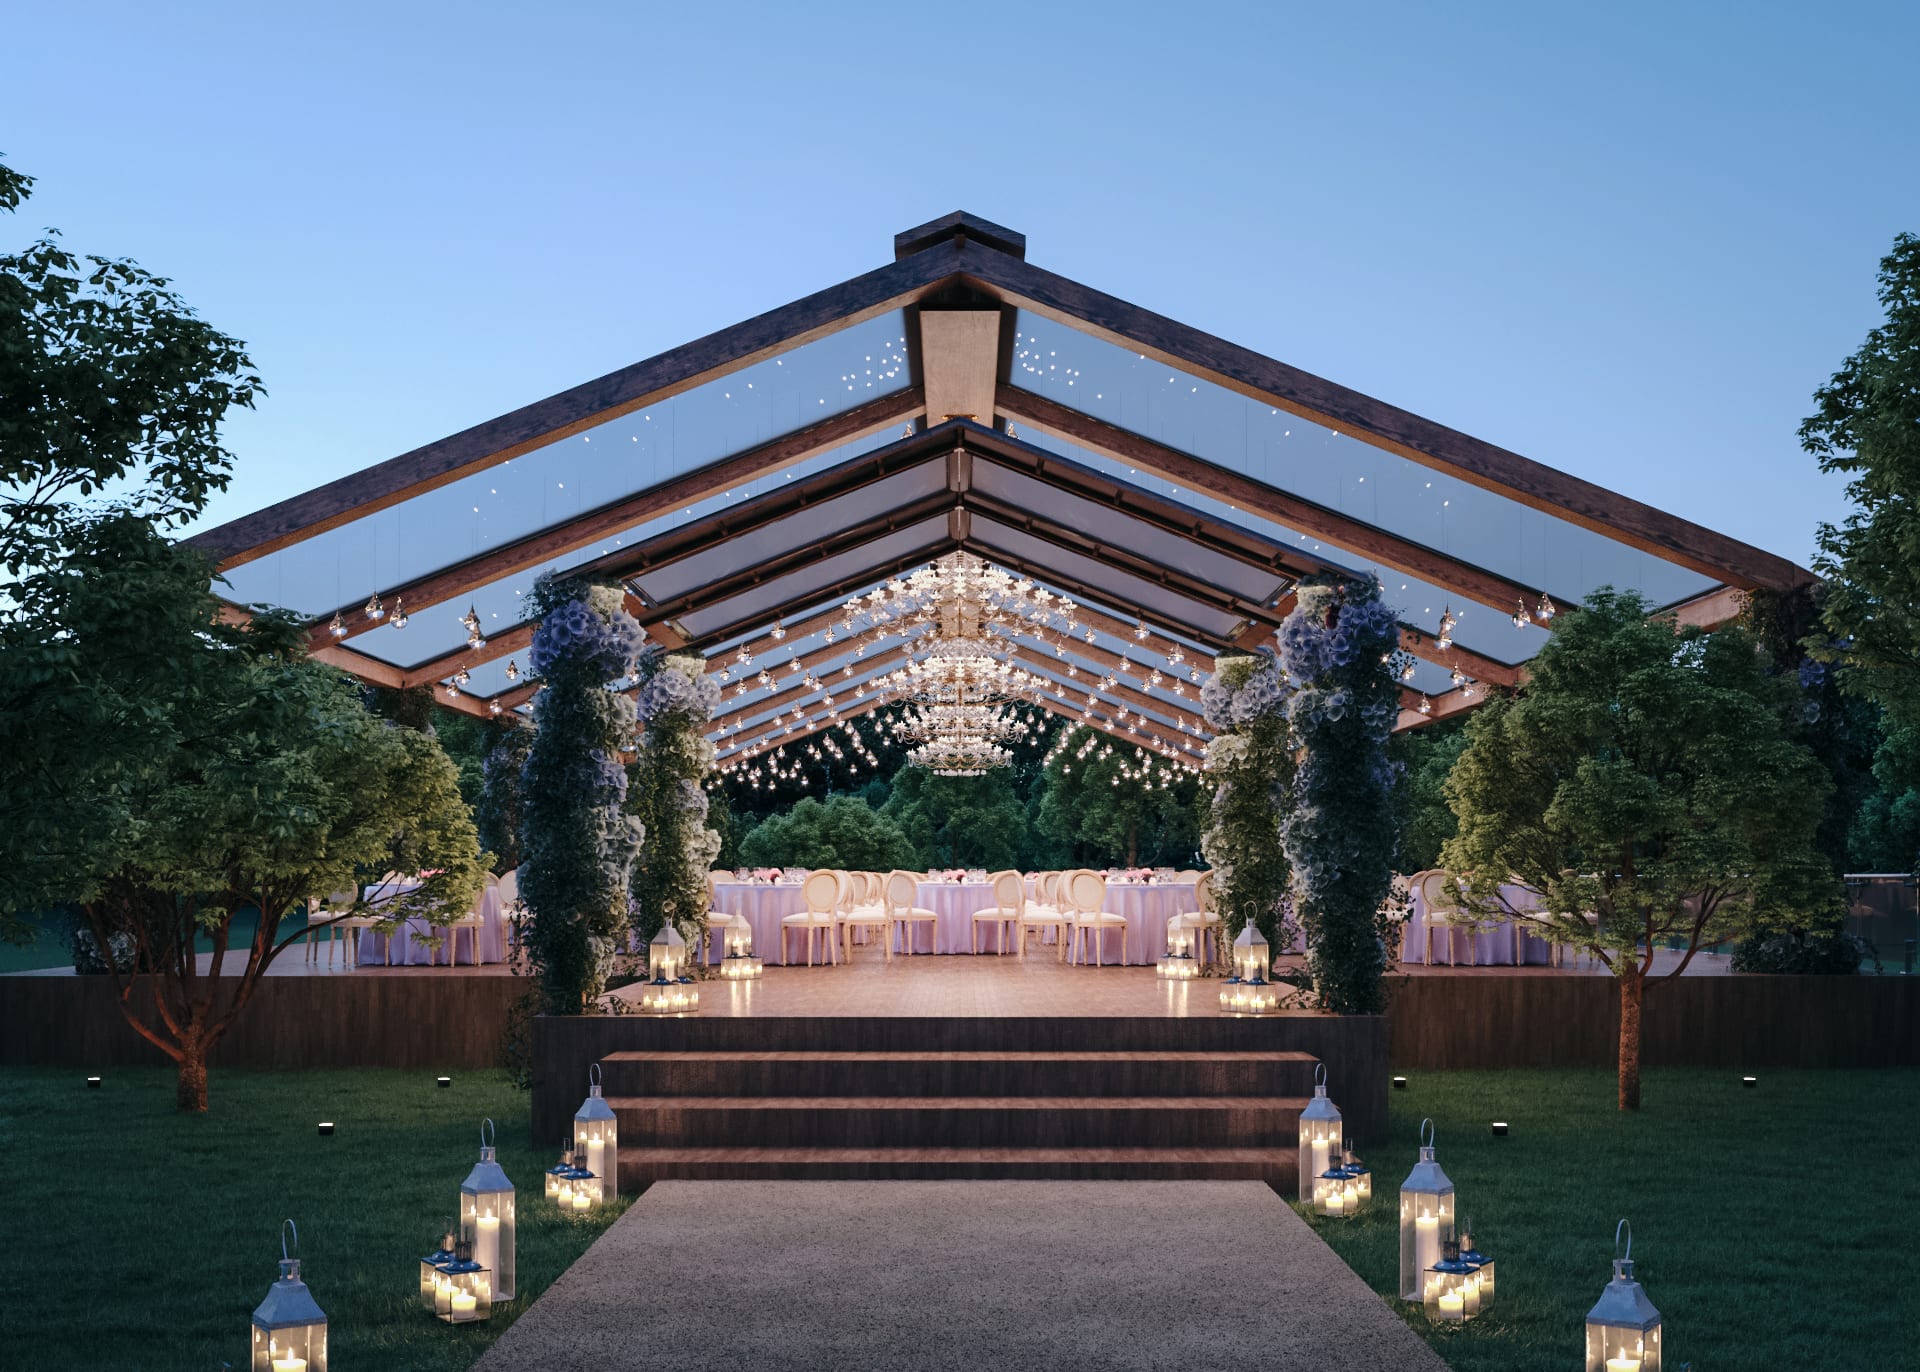 Incredibly accurate render image of high profile wedding tent for wedding planner stephanie cove near barcelona for only 300$